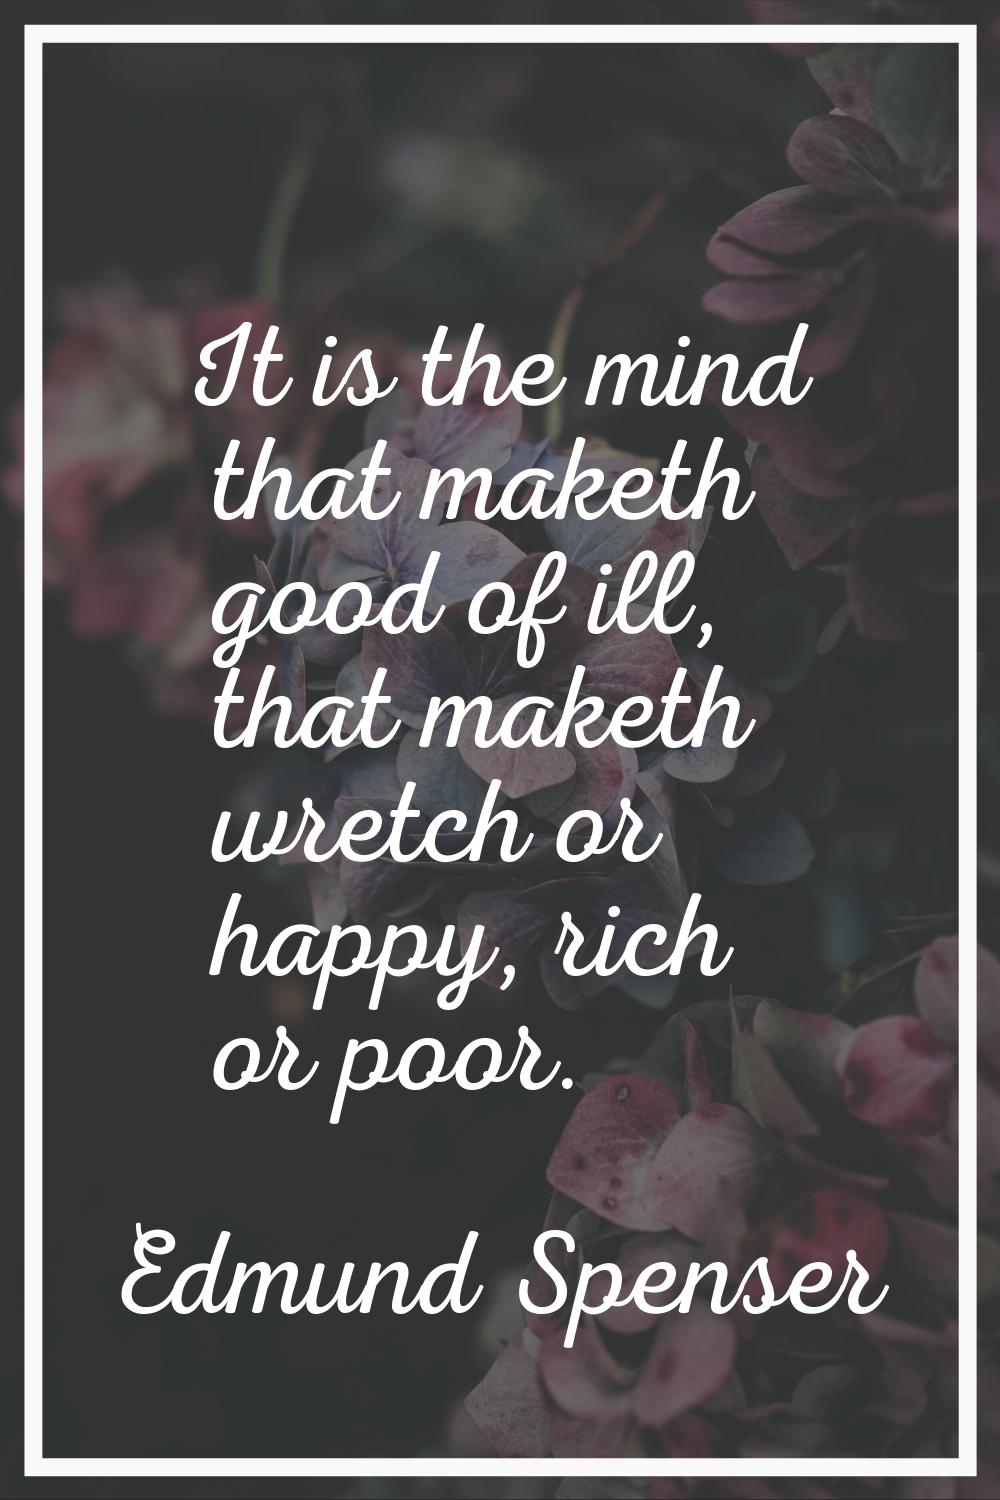 It is the mind that maketh good of ill, that maketh wretch or happy, rich or poor.